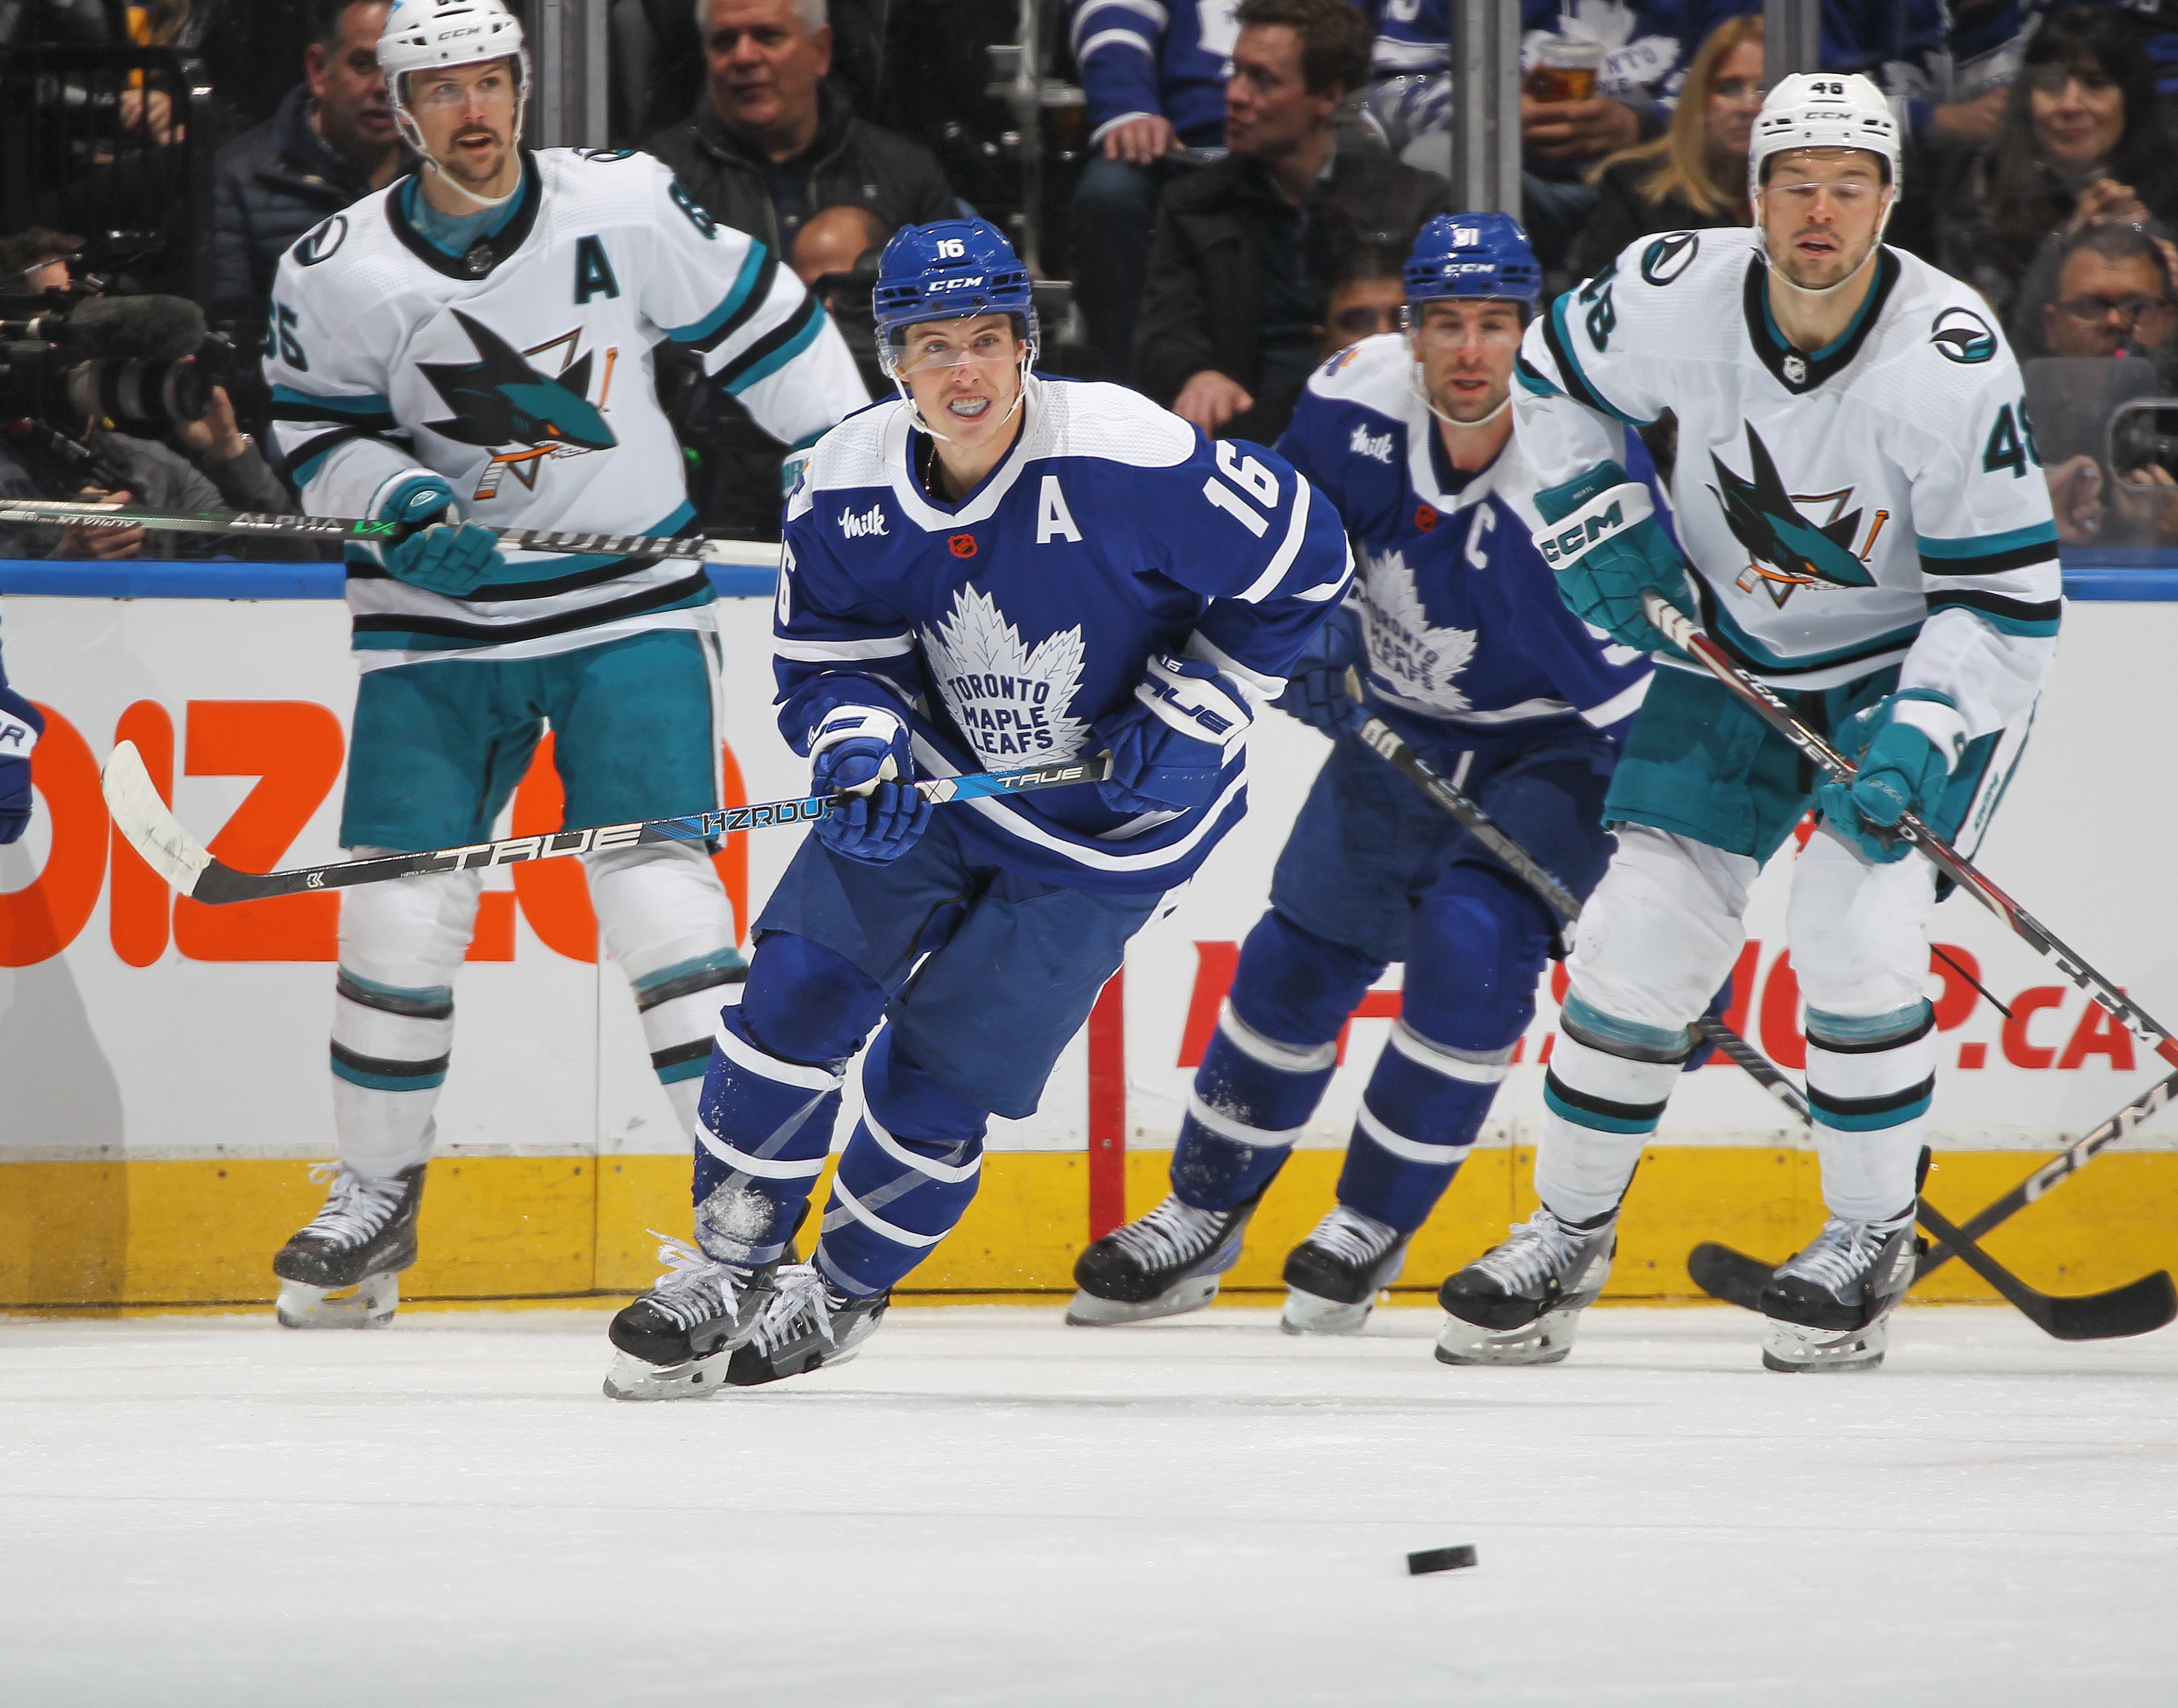 Marner ties Maple Leafs record in 3-1 win over Sharks